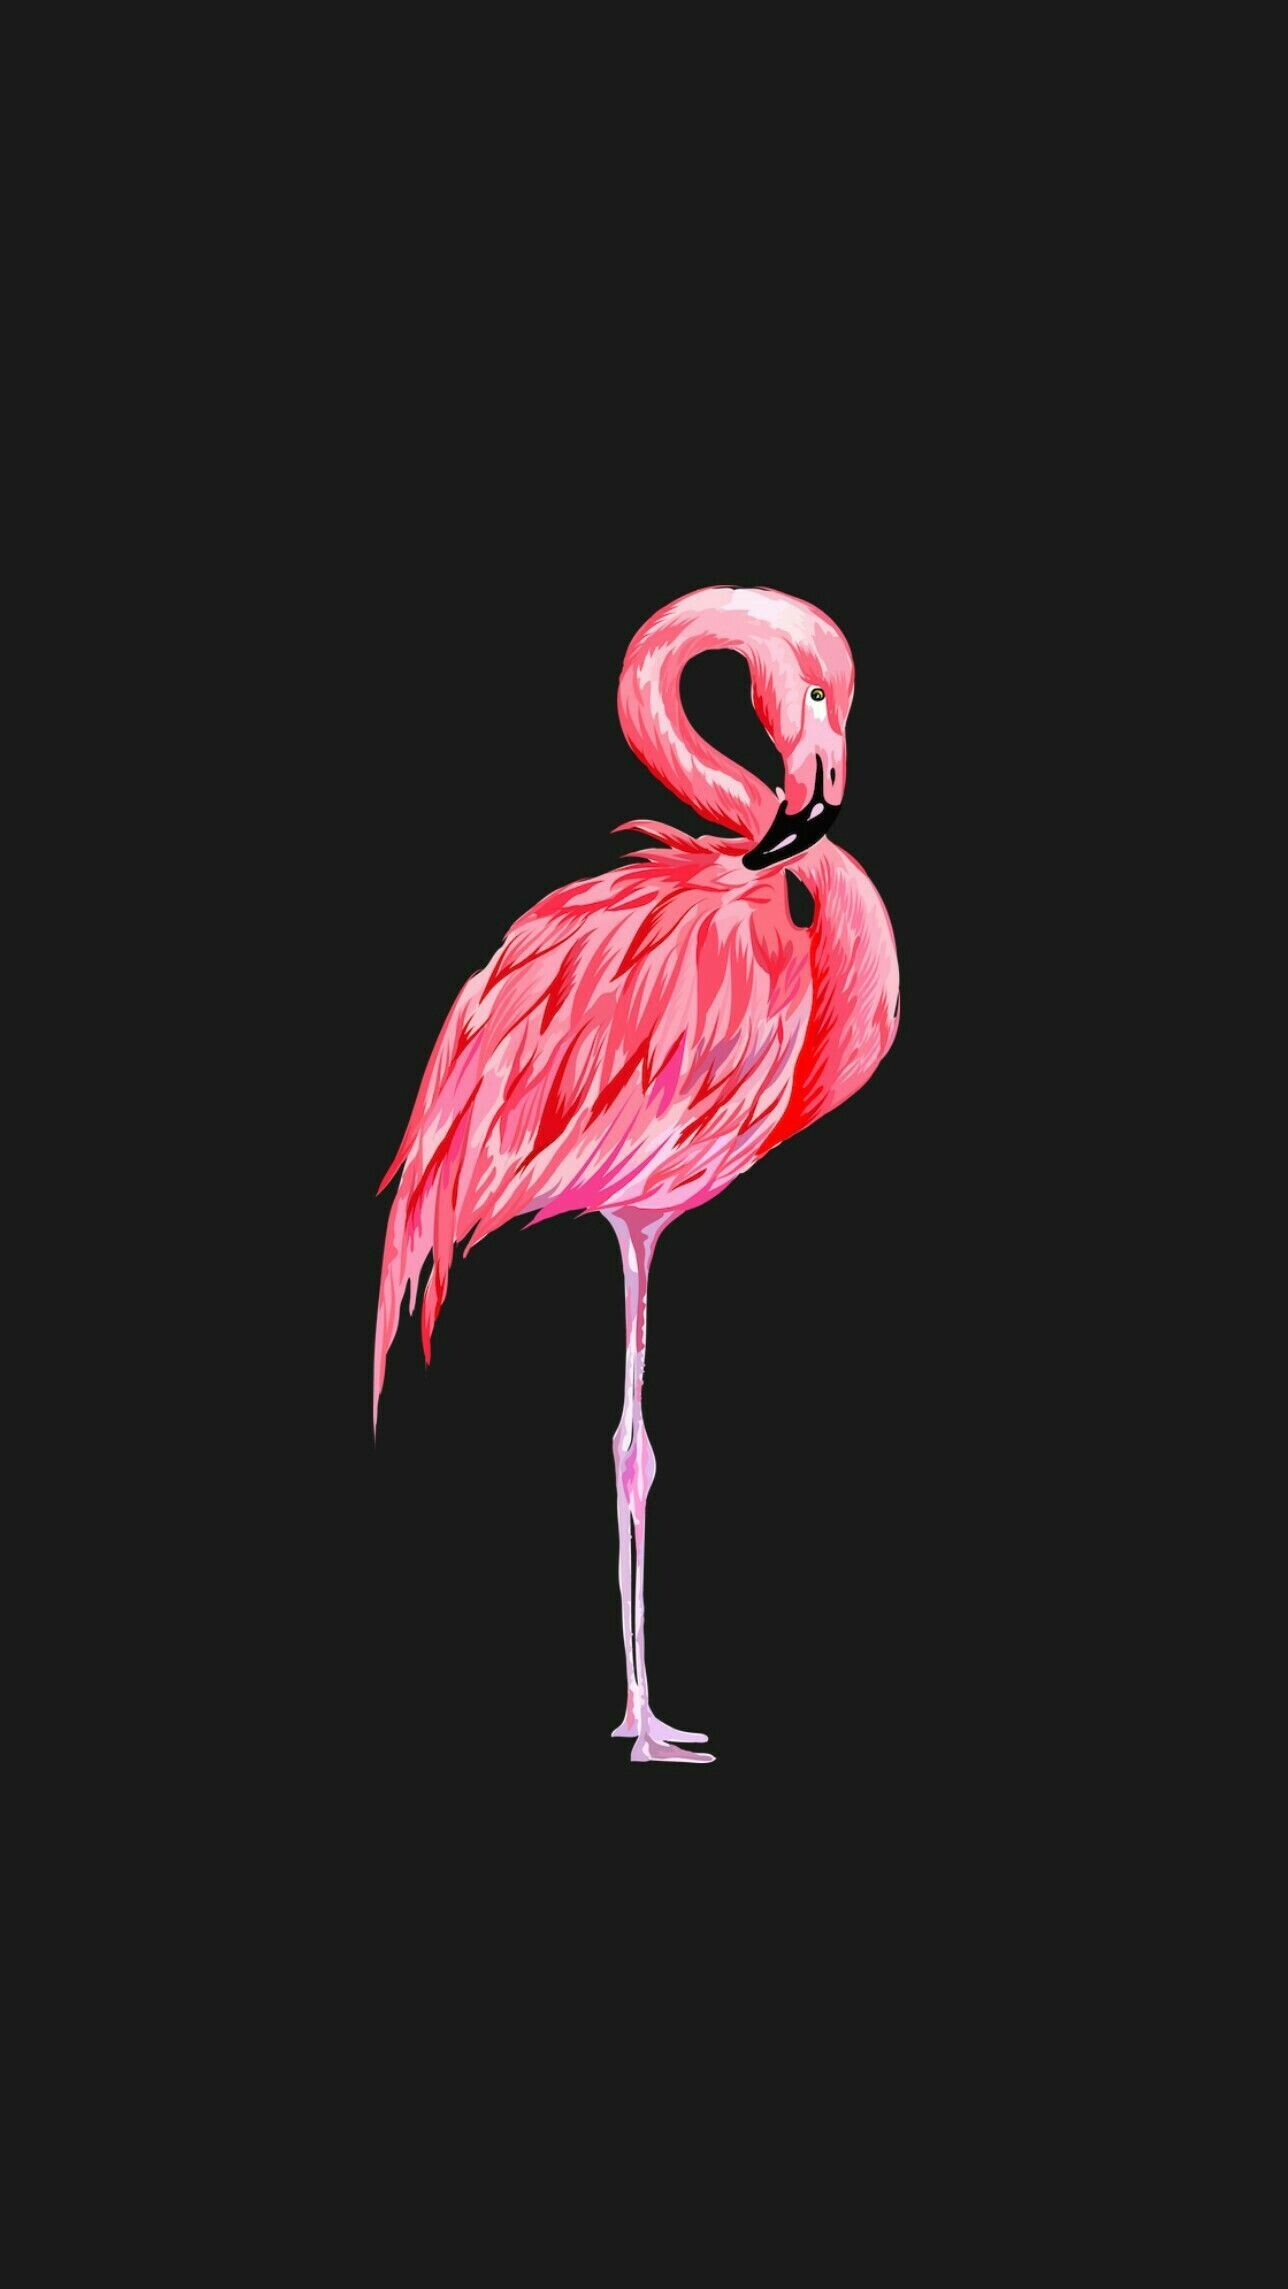 Flamingo: A pink bird, Found worldwide from the Caribbean and South America to Africa in wet habitats from freshwater to saltwater. 1290x2290 HD Wallpaper.